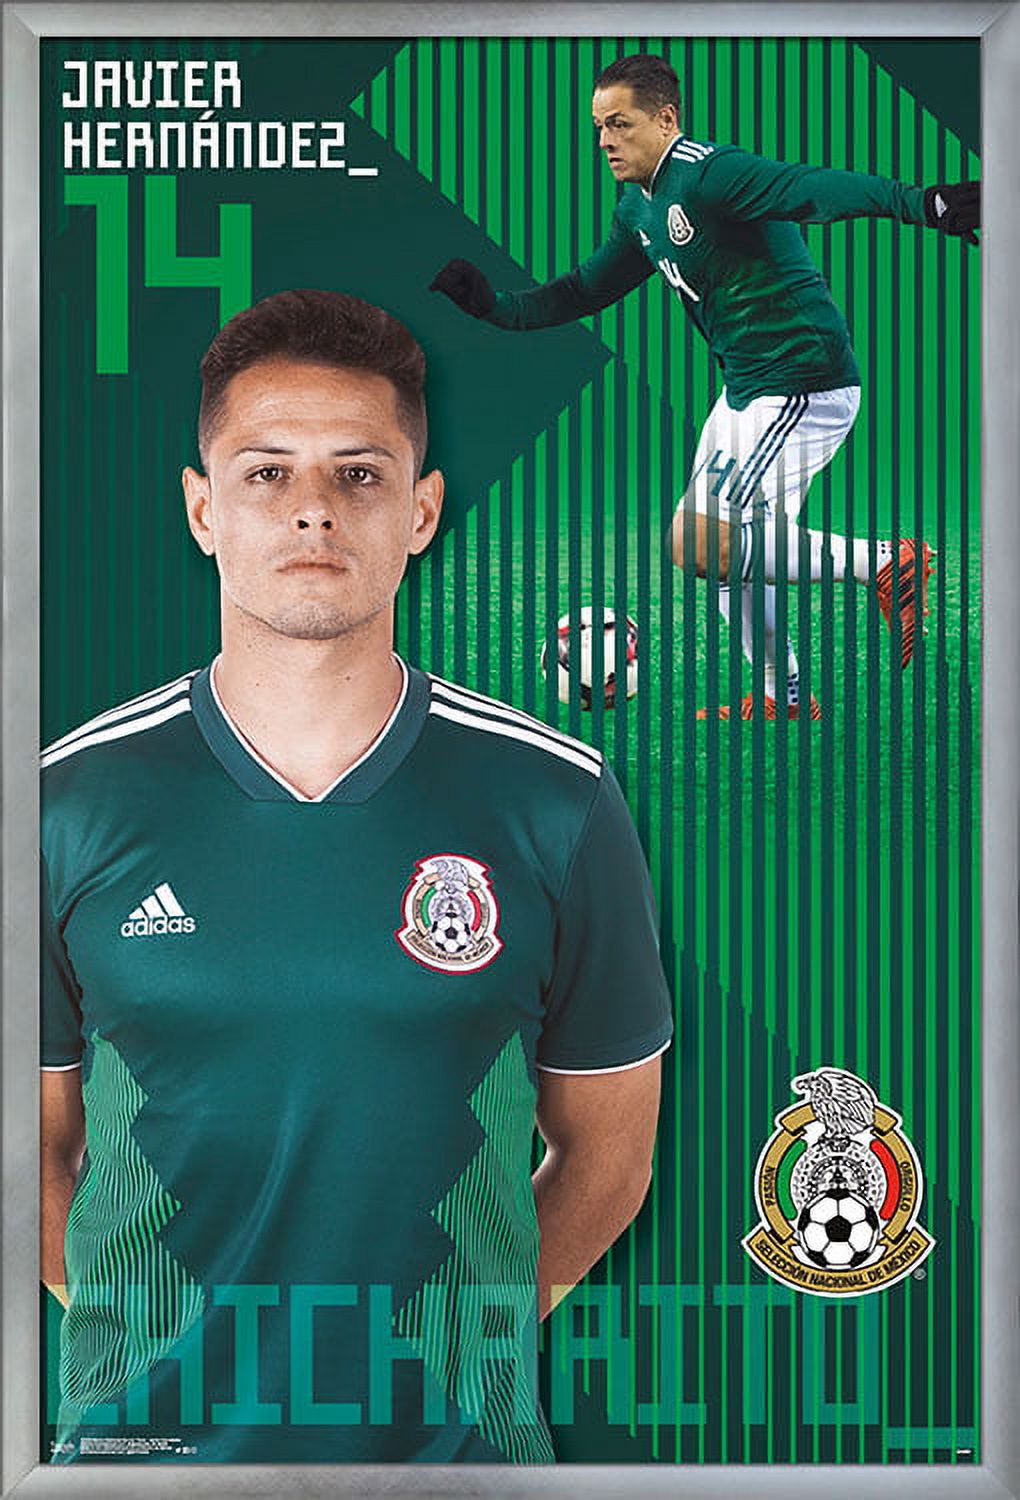 Mexico National Soccer Team - Javier Hernández - image 1 of 2